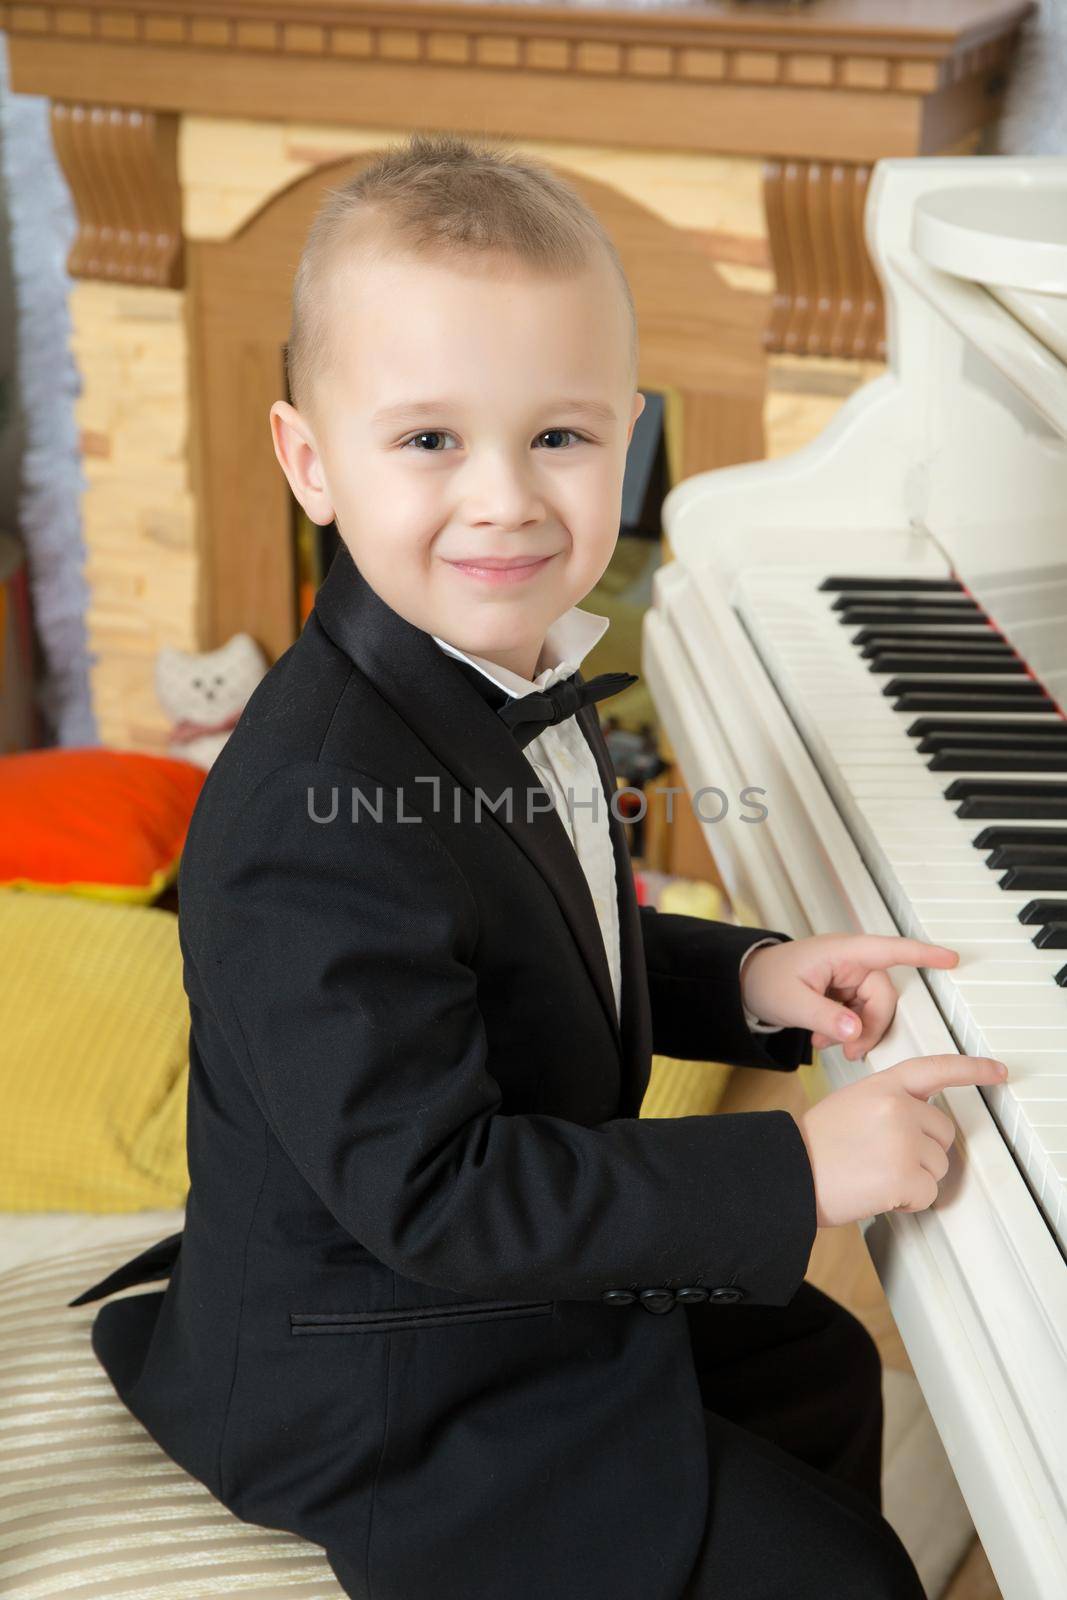 Beautiful little boy in a strict black suit , white shirt and tie.He sits at the piano keys.